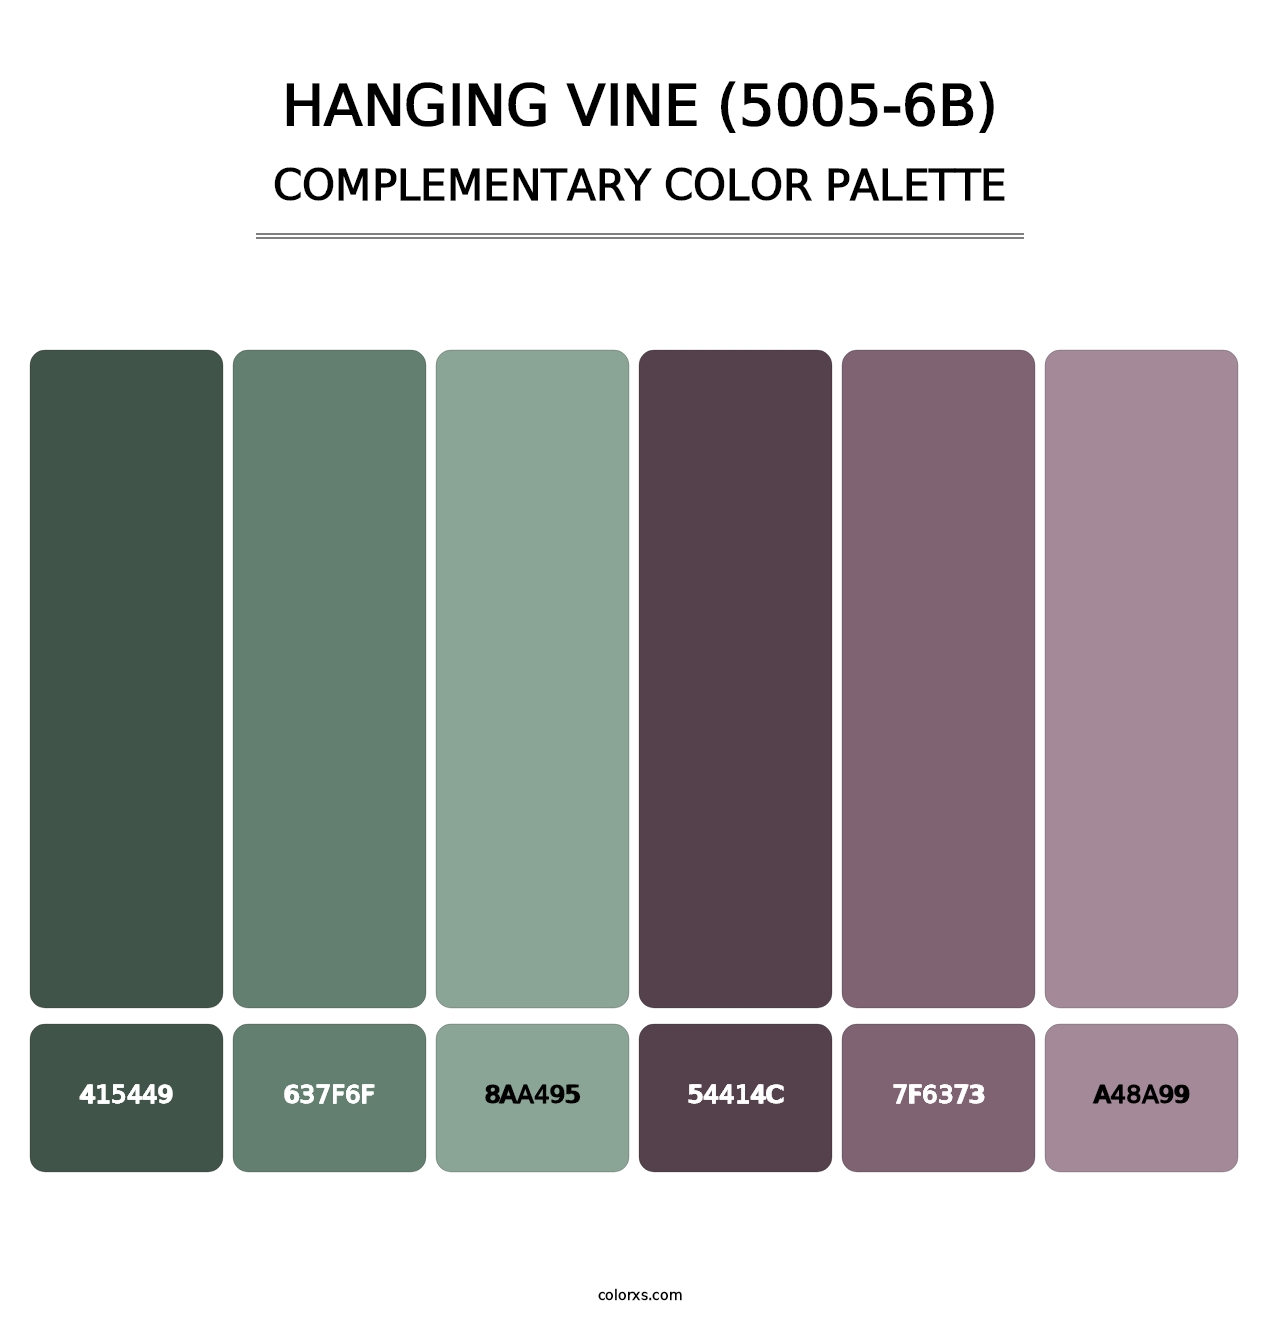 Hanging Vine (5005-6B) - Complementary Color Palette